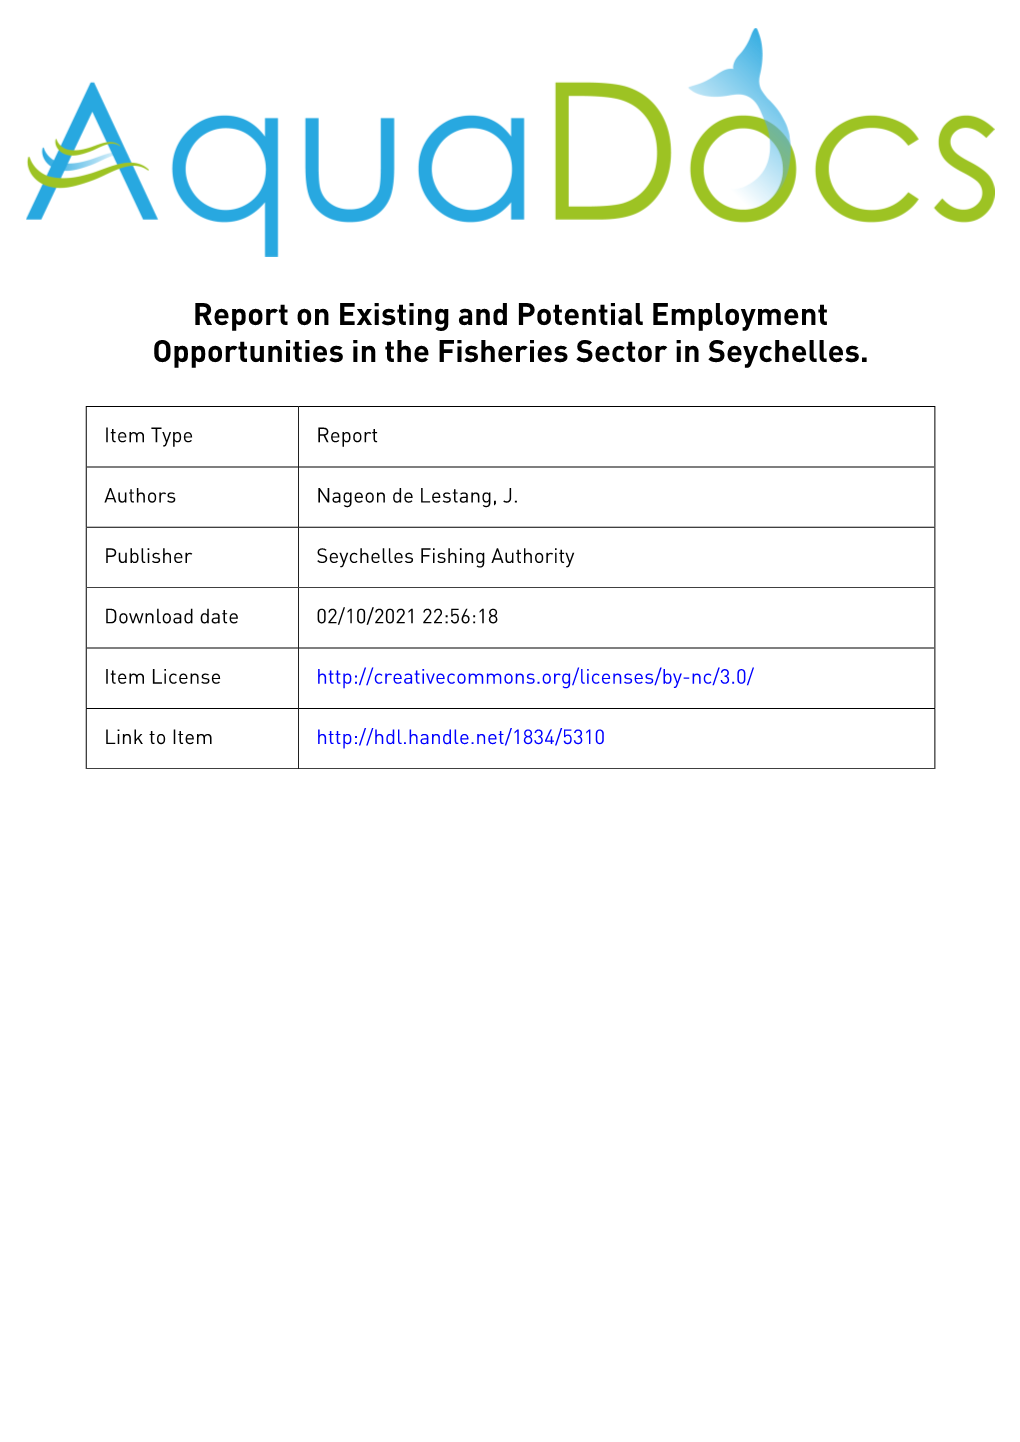 Report on Existing and Potential Employment Opportunities in the Fisheries Sector in Seychelles